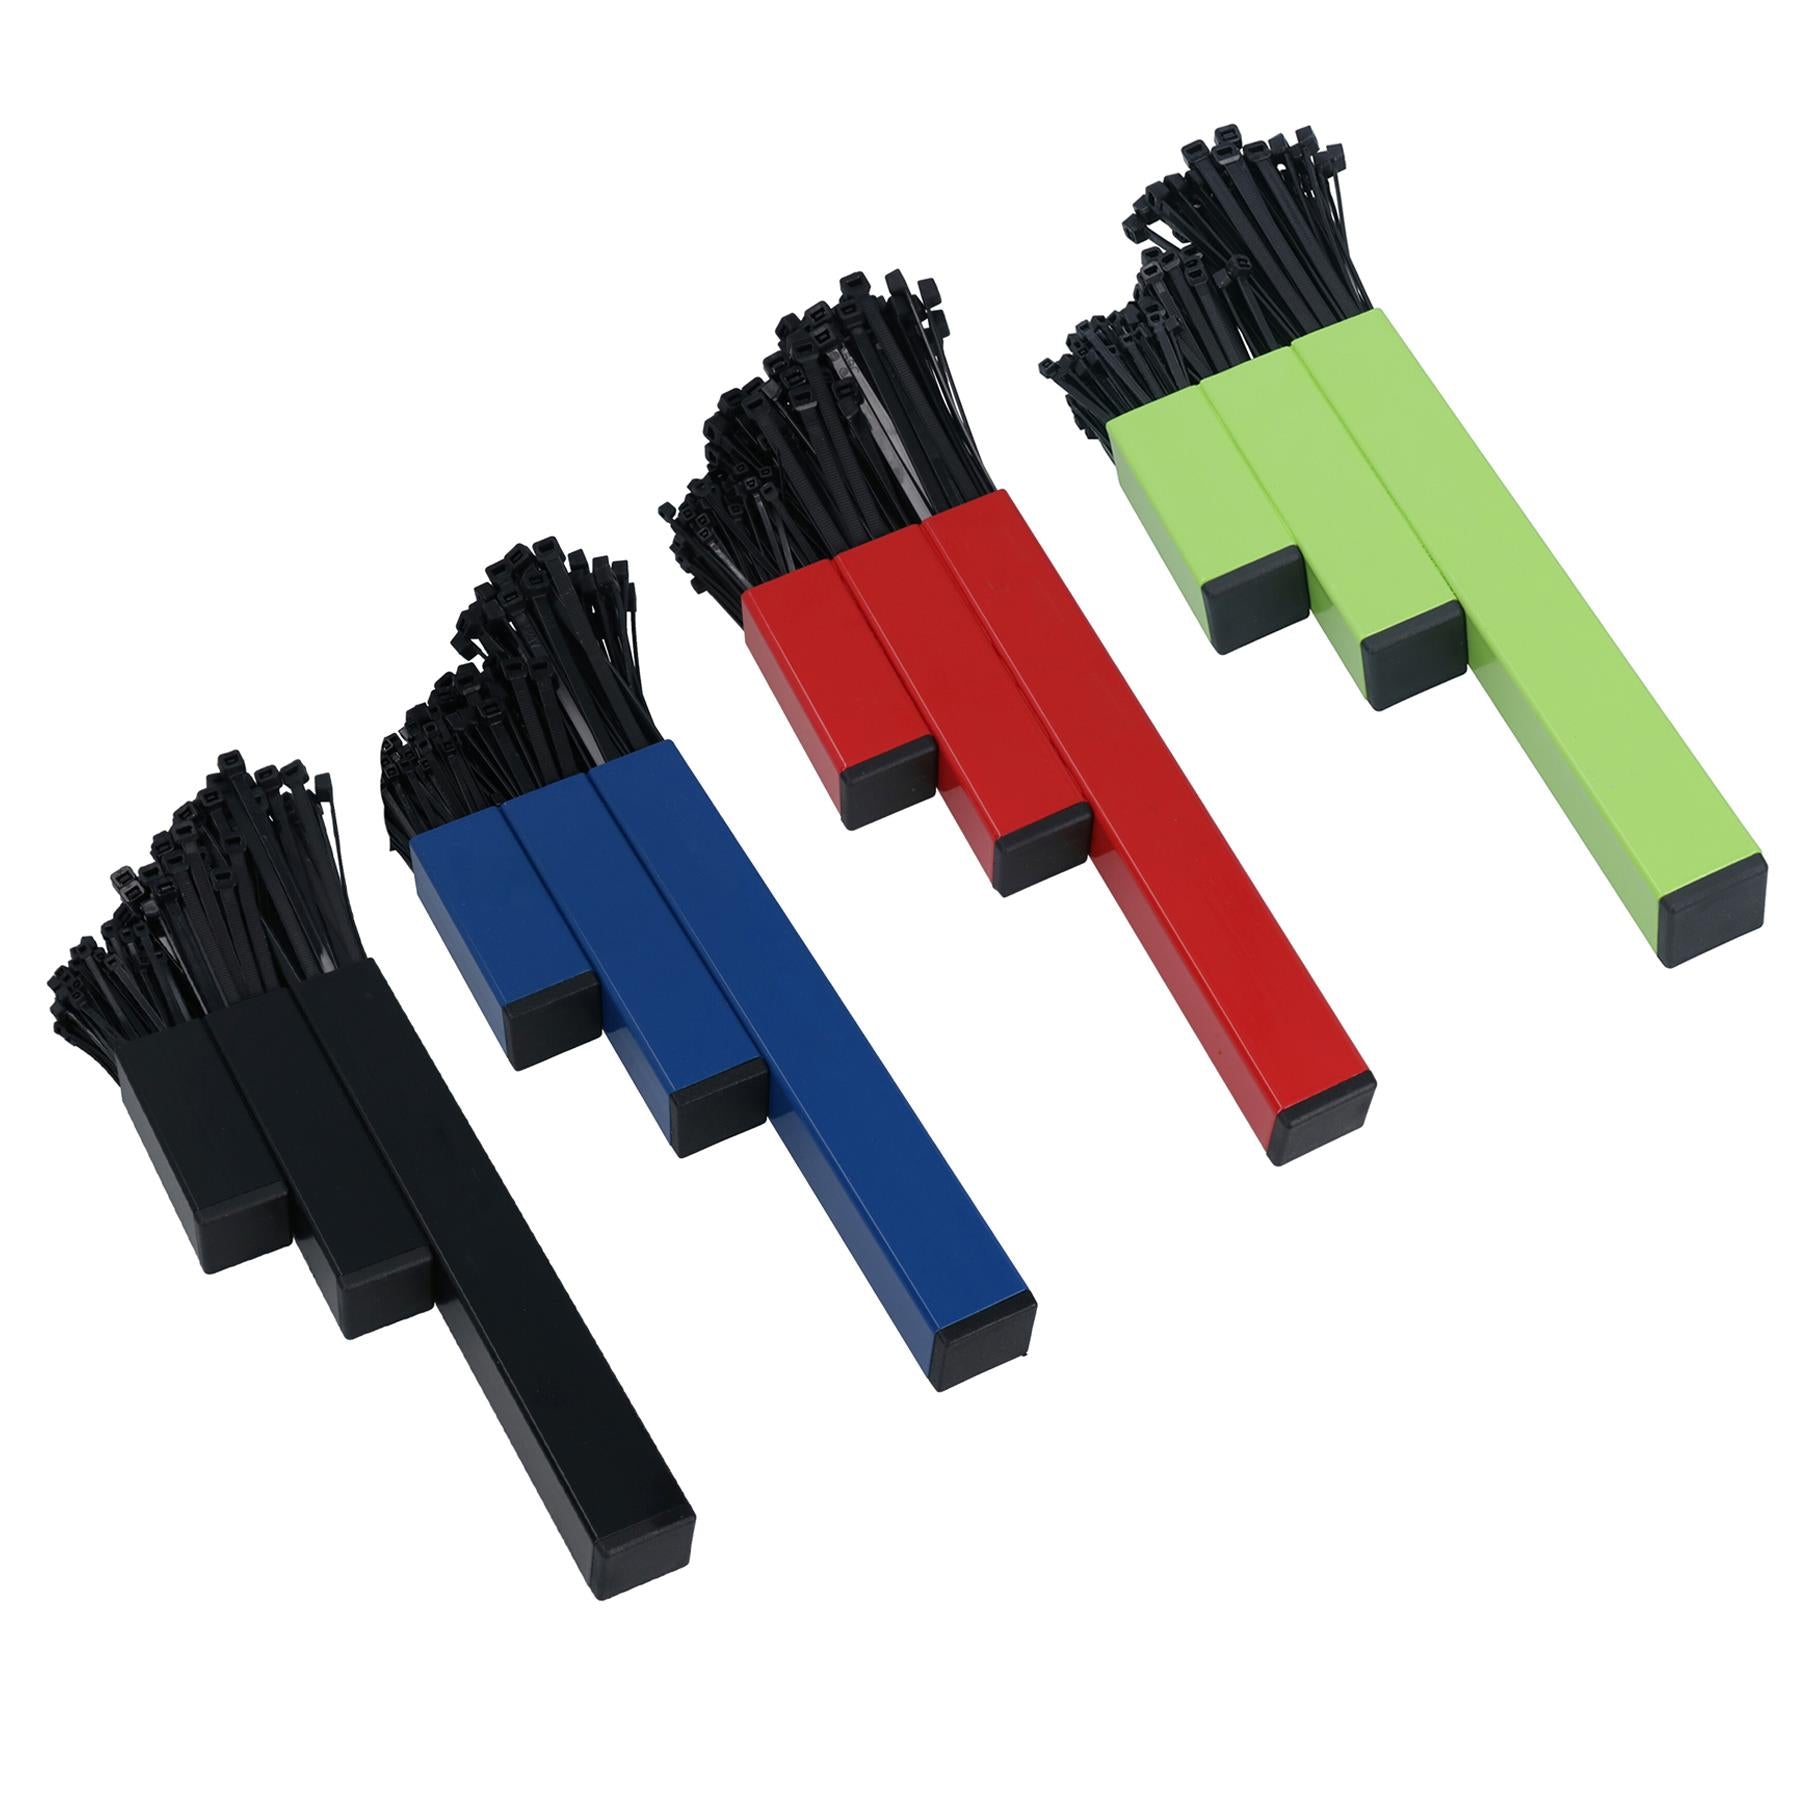 Cable Tie Holder Storage Rack with Magnetic Fixings + 200 Cable Ties